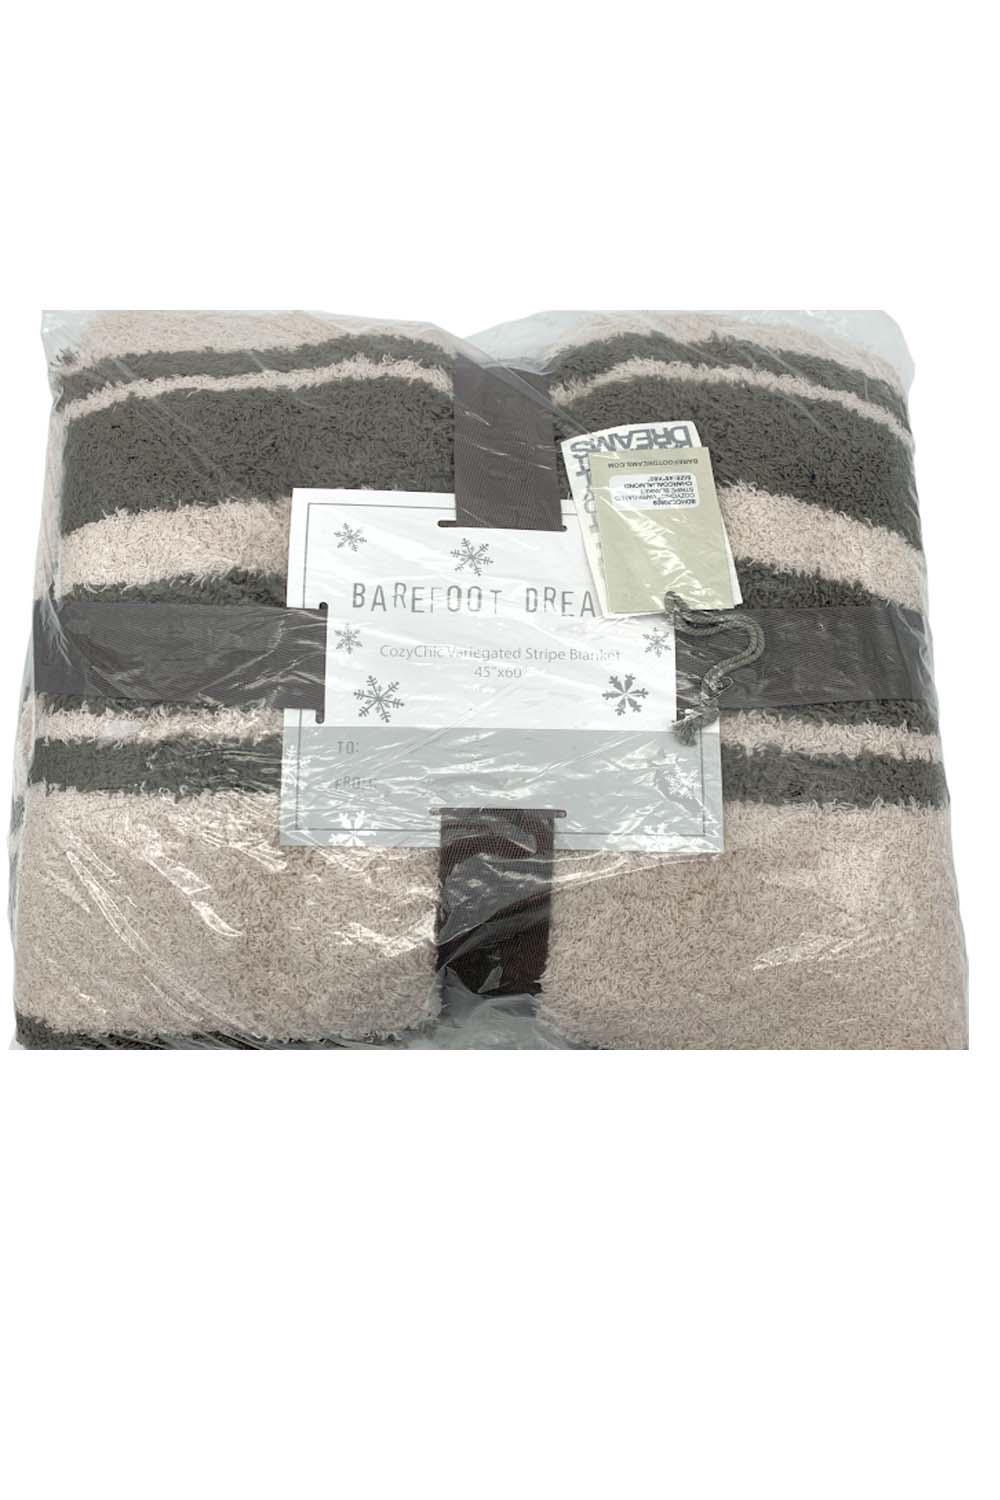 BRAND NEW Barefoot Dreams CozyChic Blanket Charcoal/White 45” X 60”